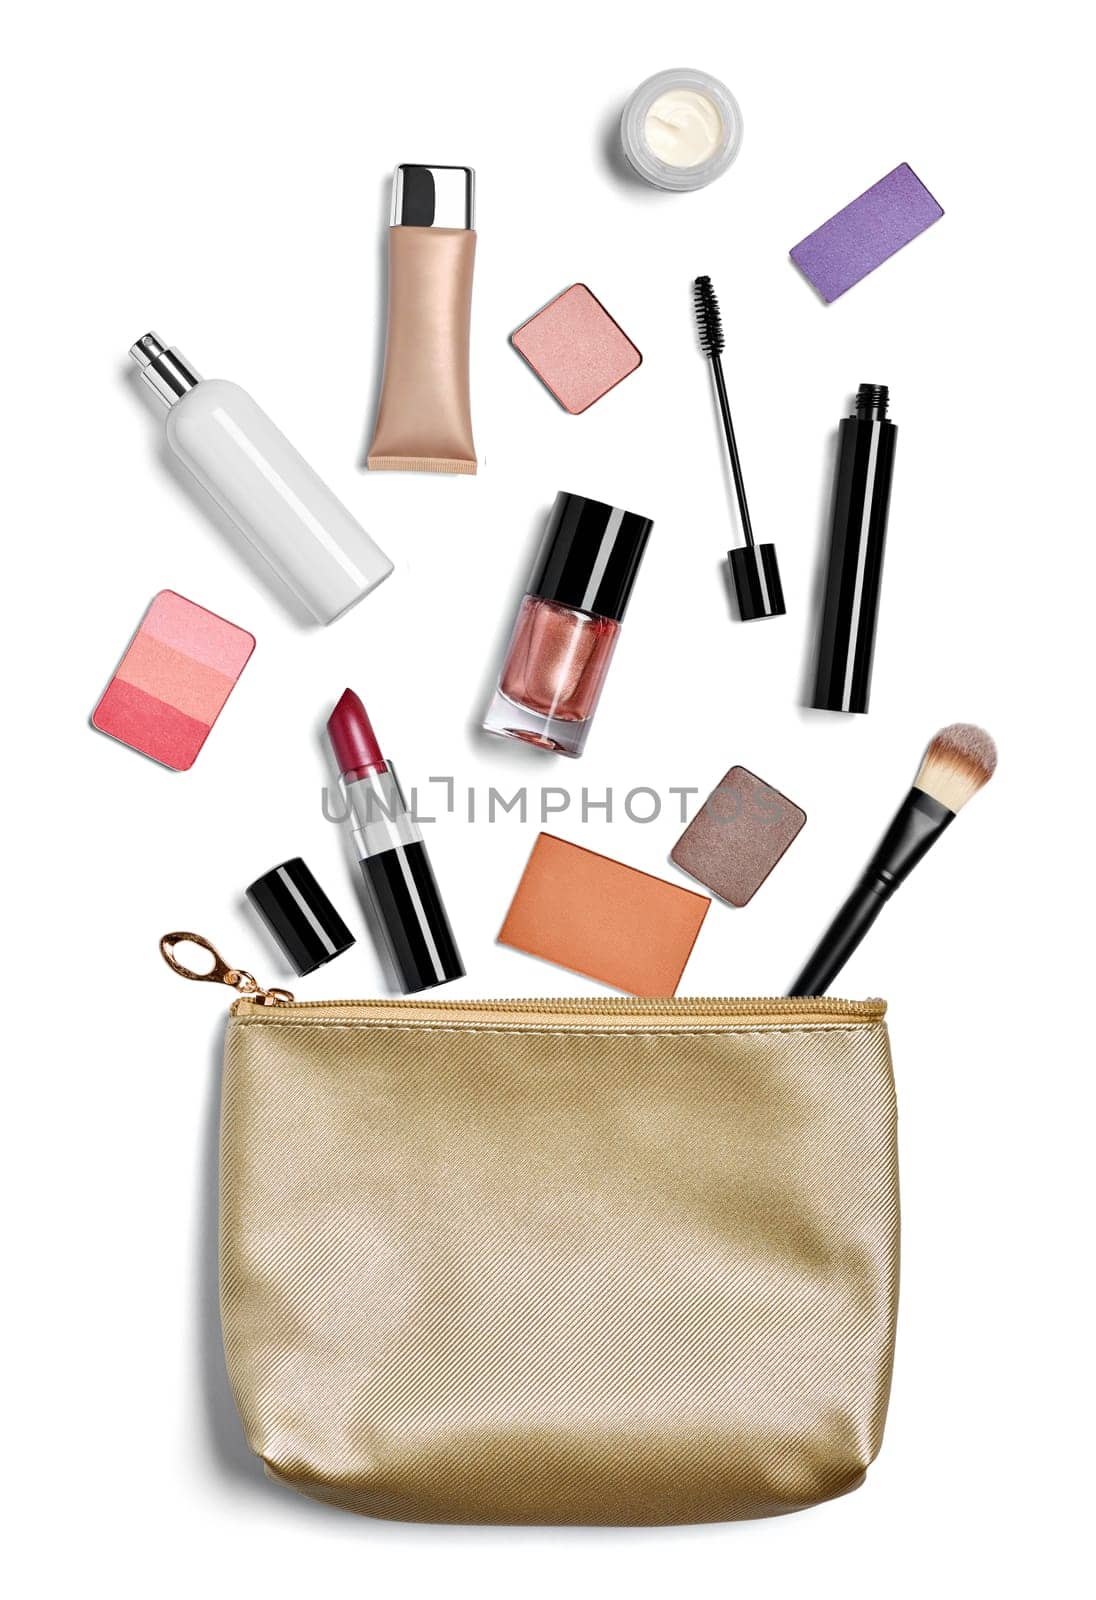 close up of a vanity case full of make up on white background